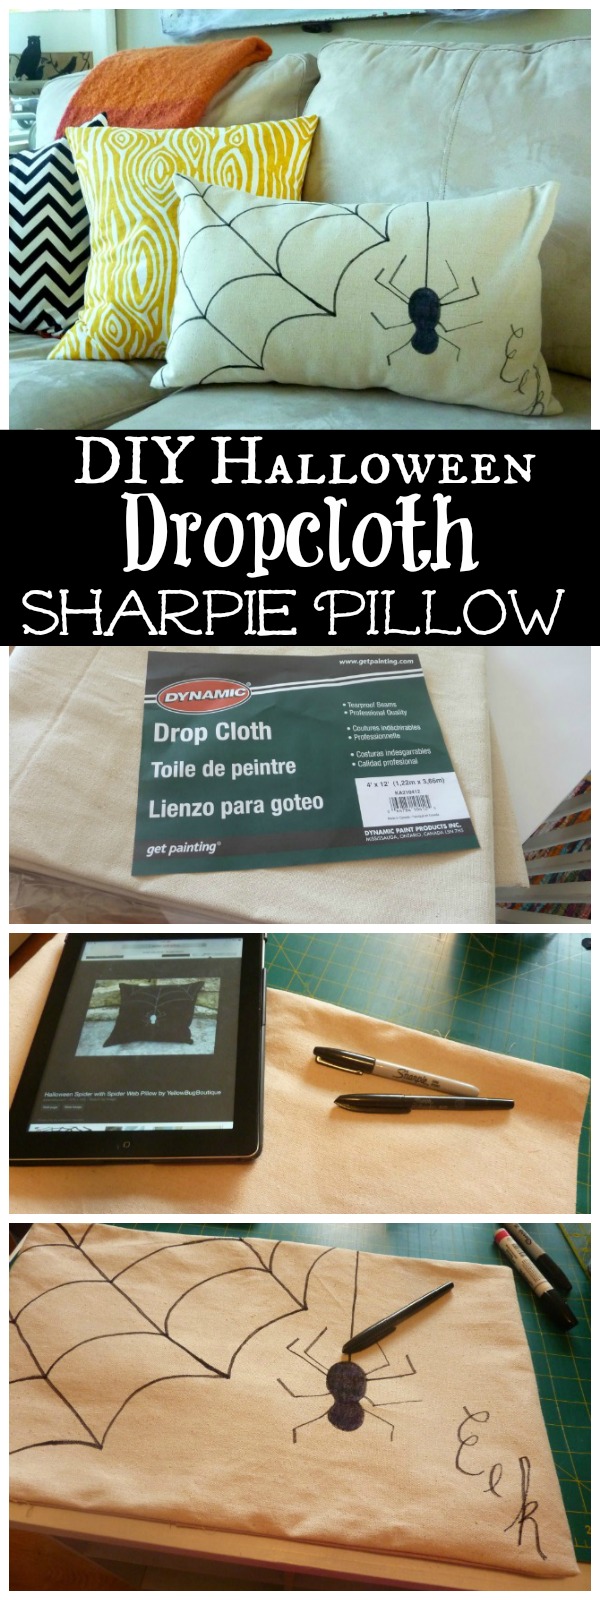 How to make a quick and easy DIY Halloween Dropcloth Sharpie Pillow at The Happy Housie